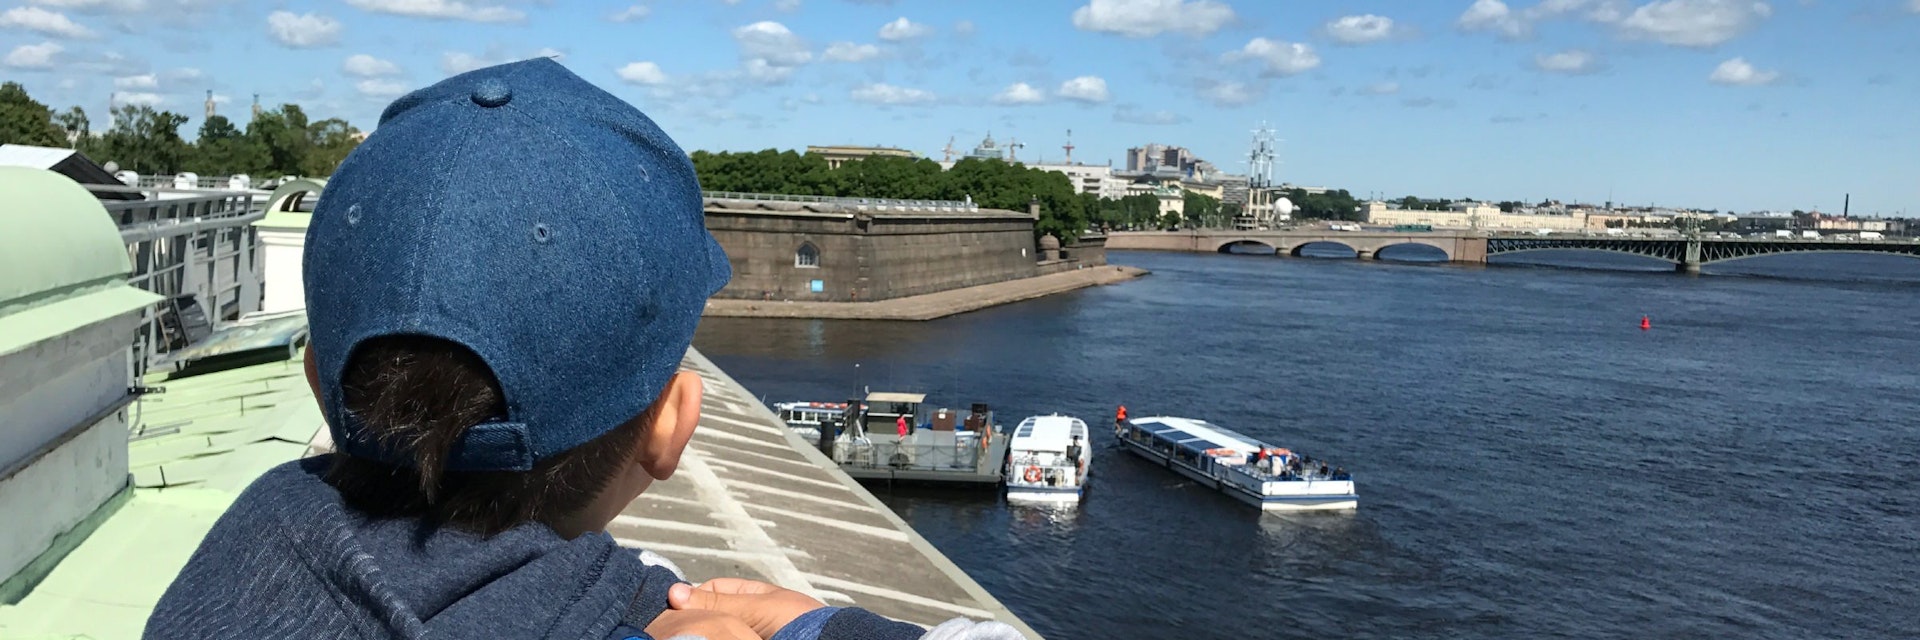 View from the top of Neva Panorama walkway at the Peter & Paul Fortress in St Petersburg.